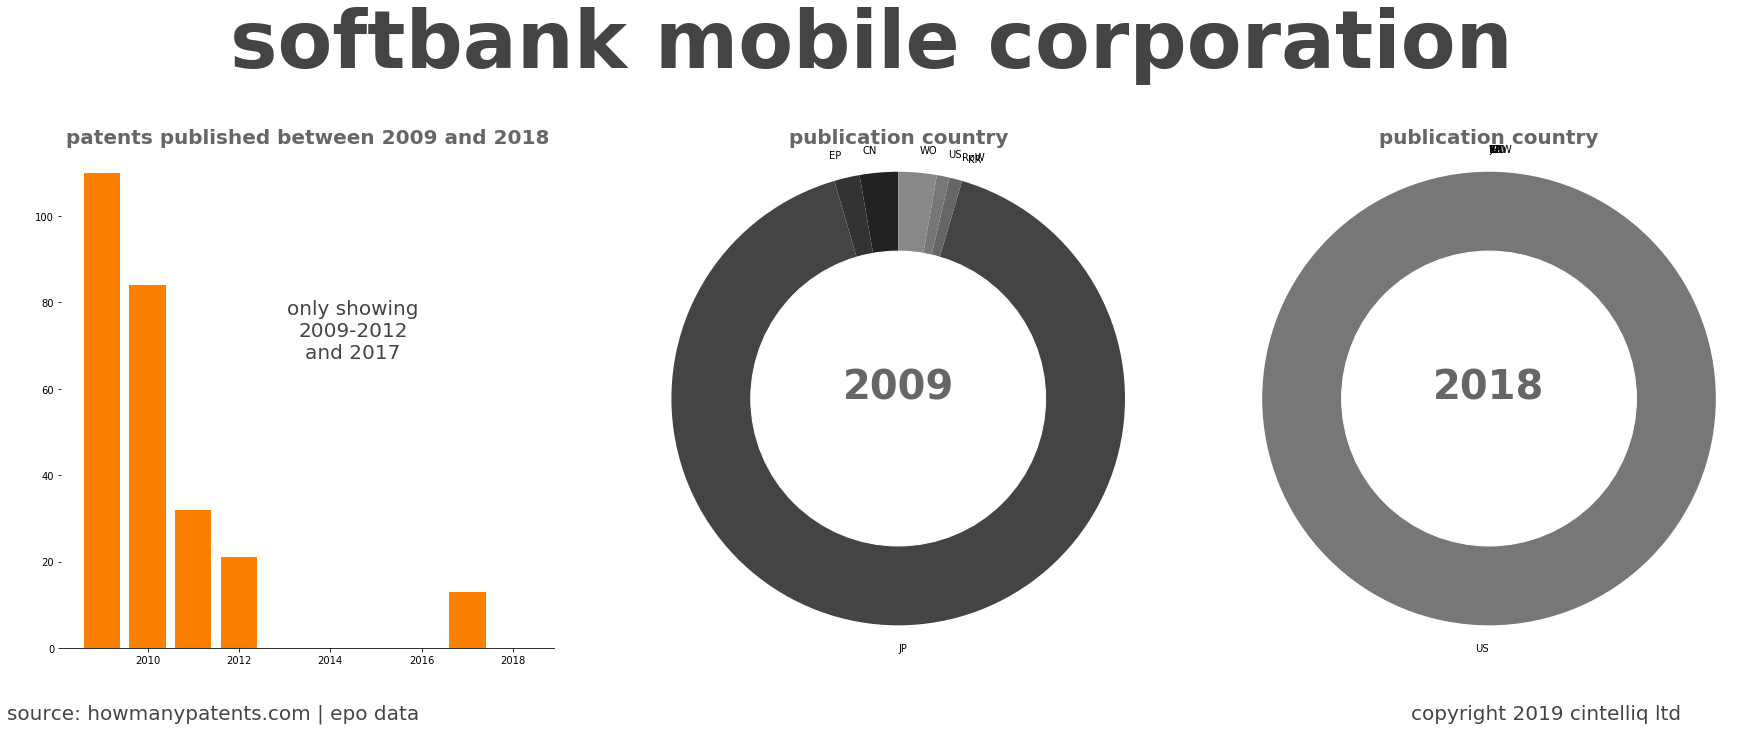 summary of patents for Softbank Mobile Corporation